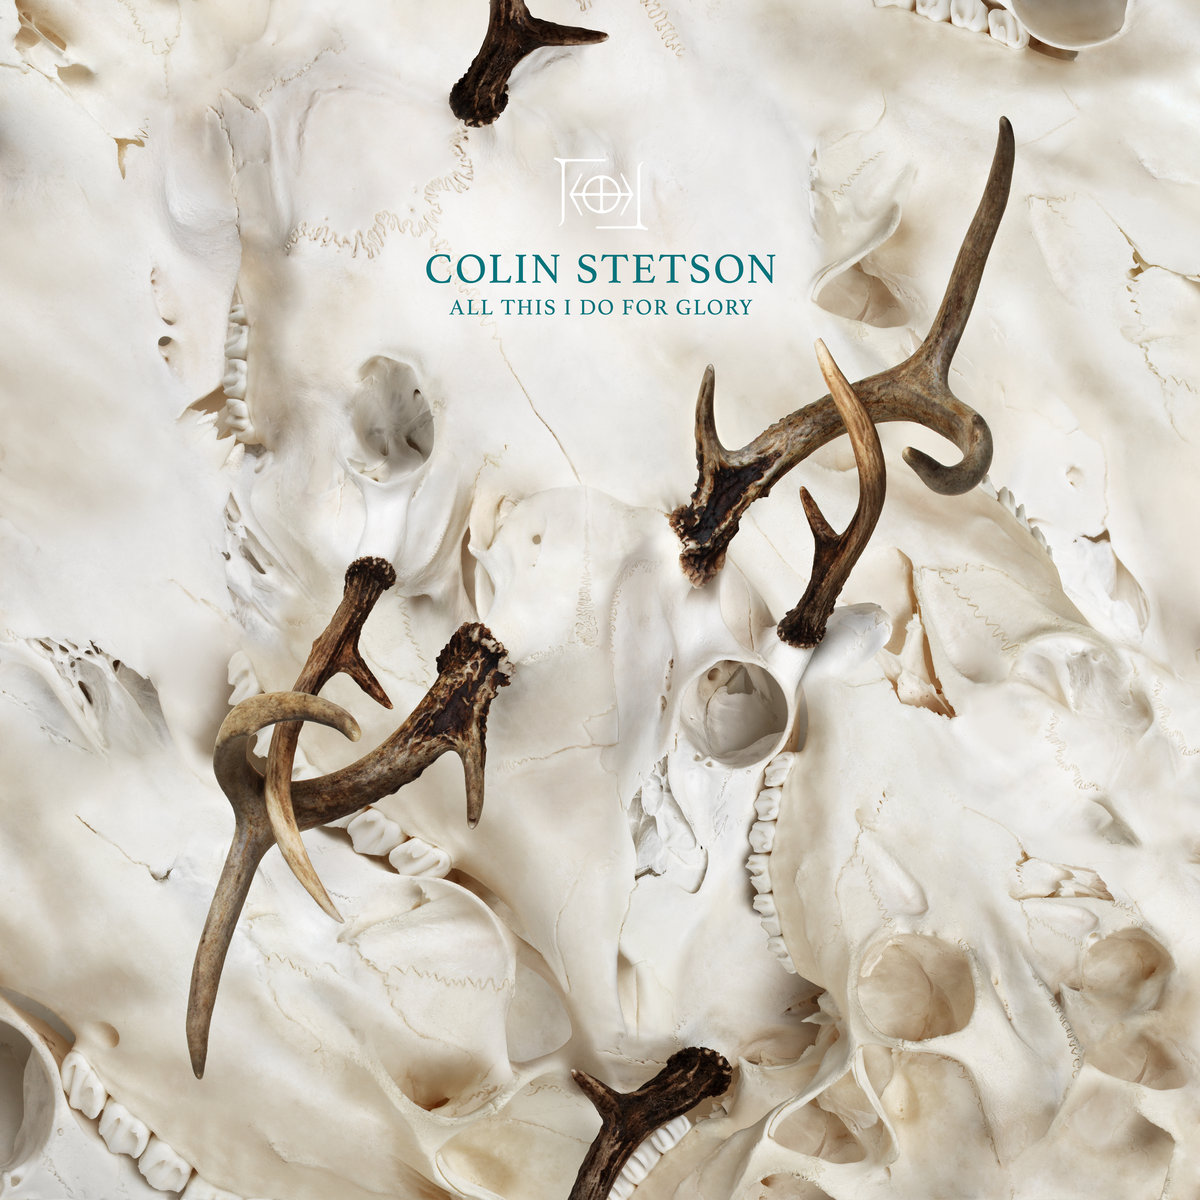 'All This I Do for Glory' by Colin Stetson, album review by Gregory Adams.